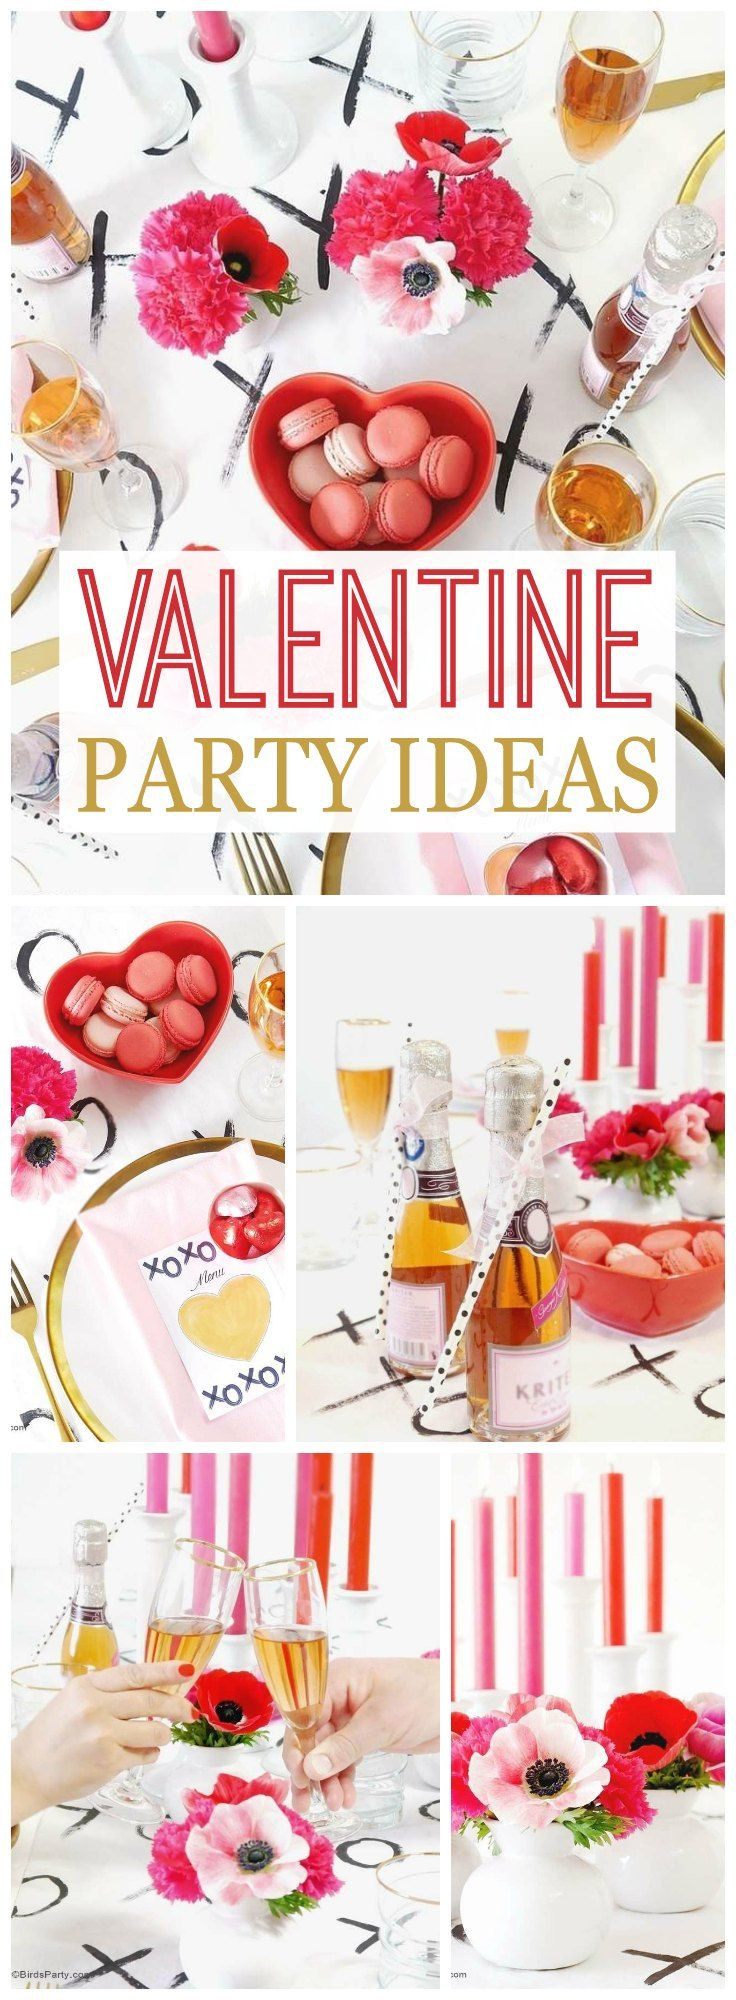 Valentines Day Dinner Party Ideas
 Hearts Valentine s Day "Modern Valentine s Day Dinner